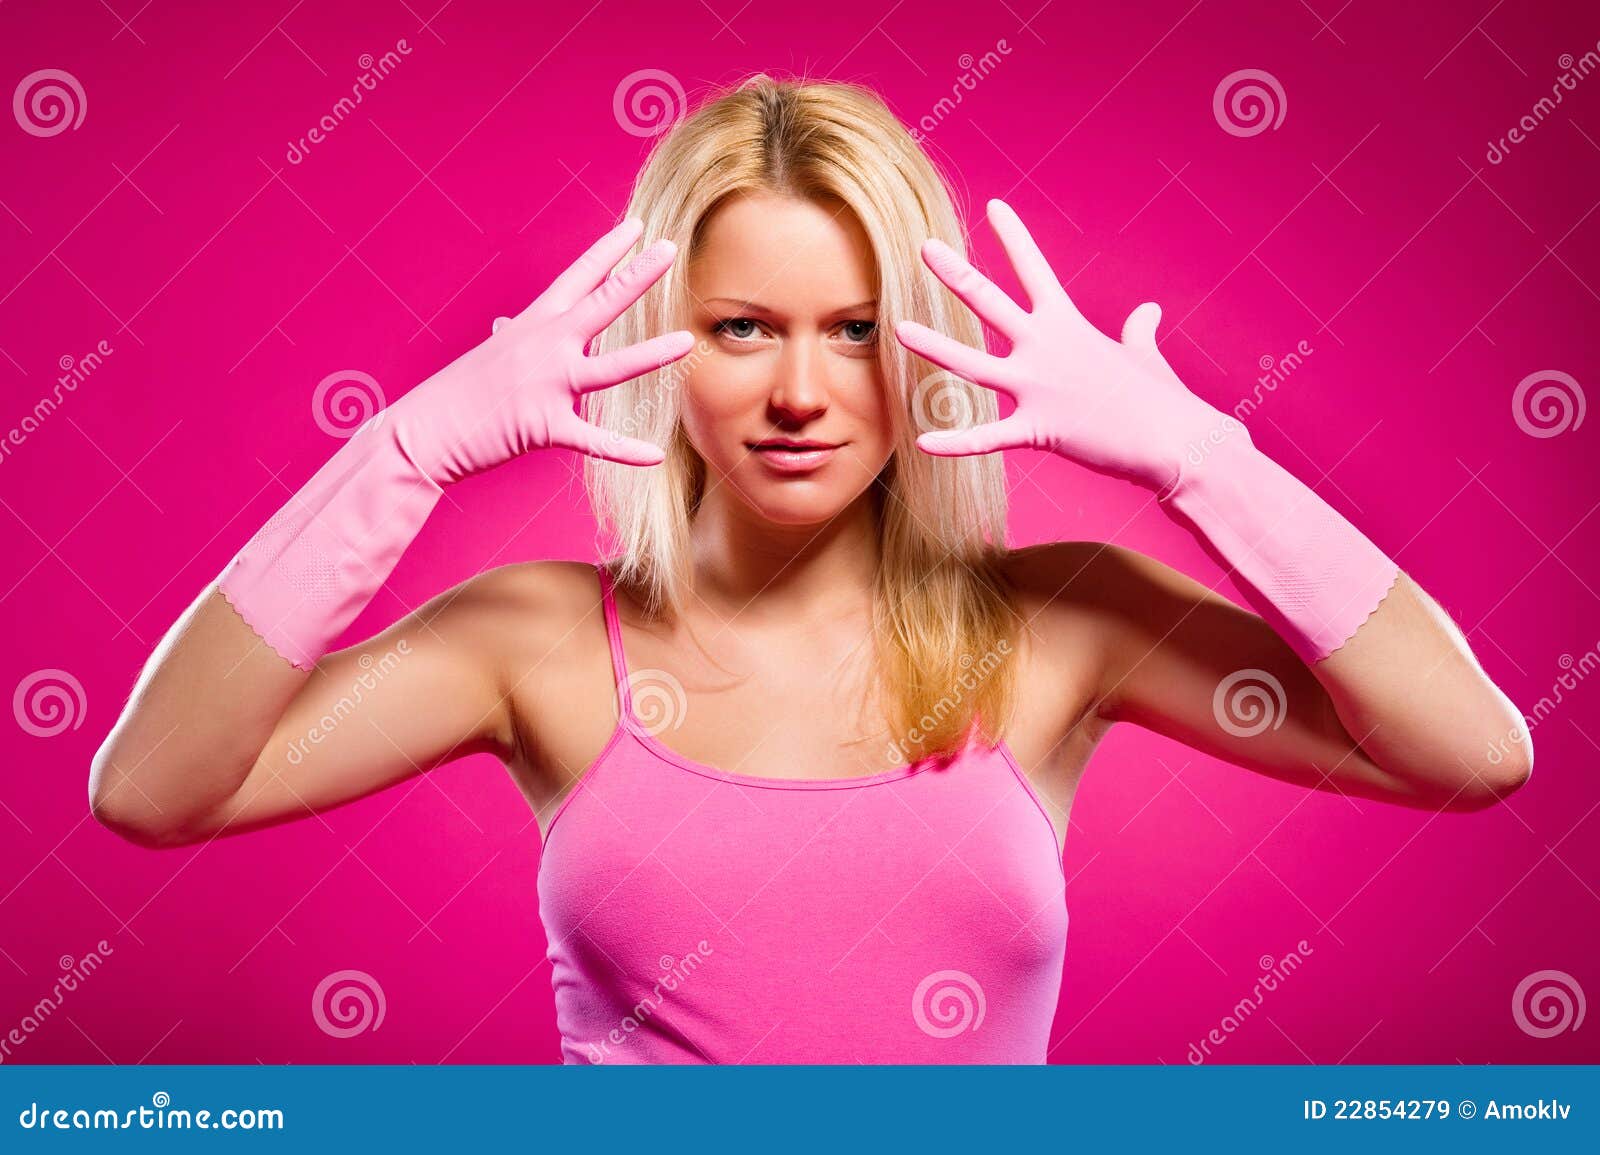 Woman In Rubber Gloves Indoors Royalty Free Stock Images